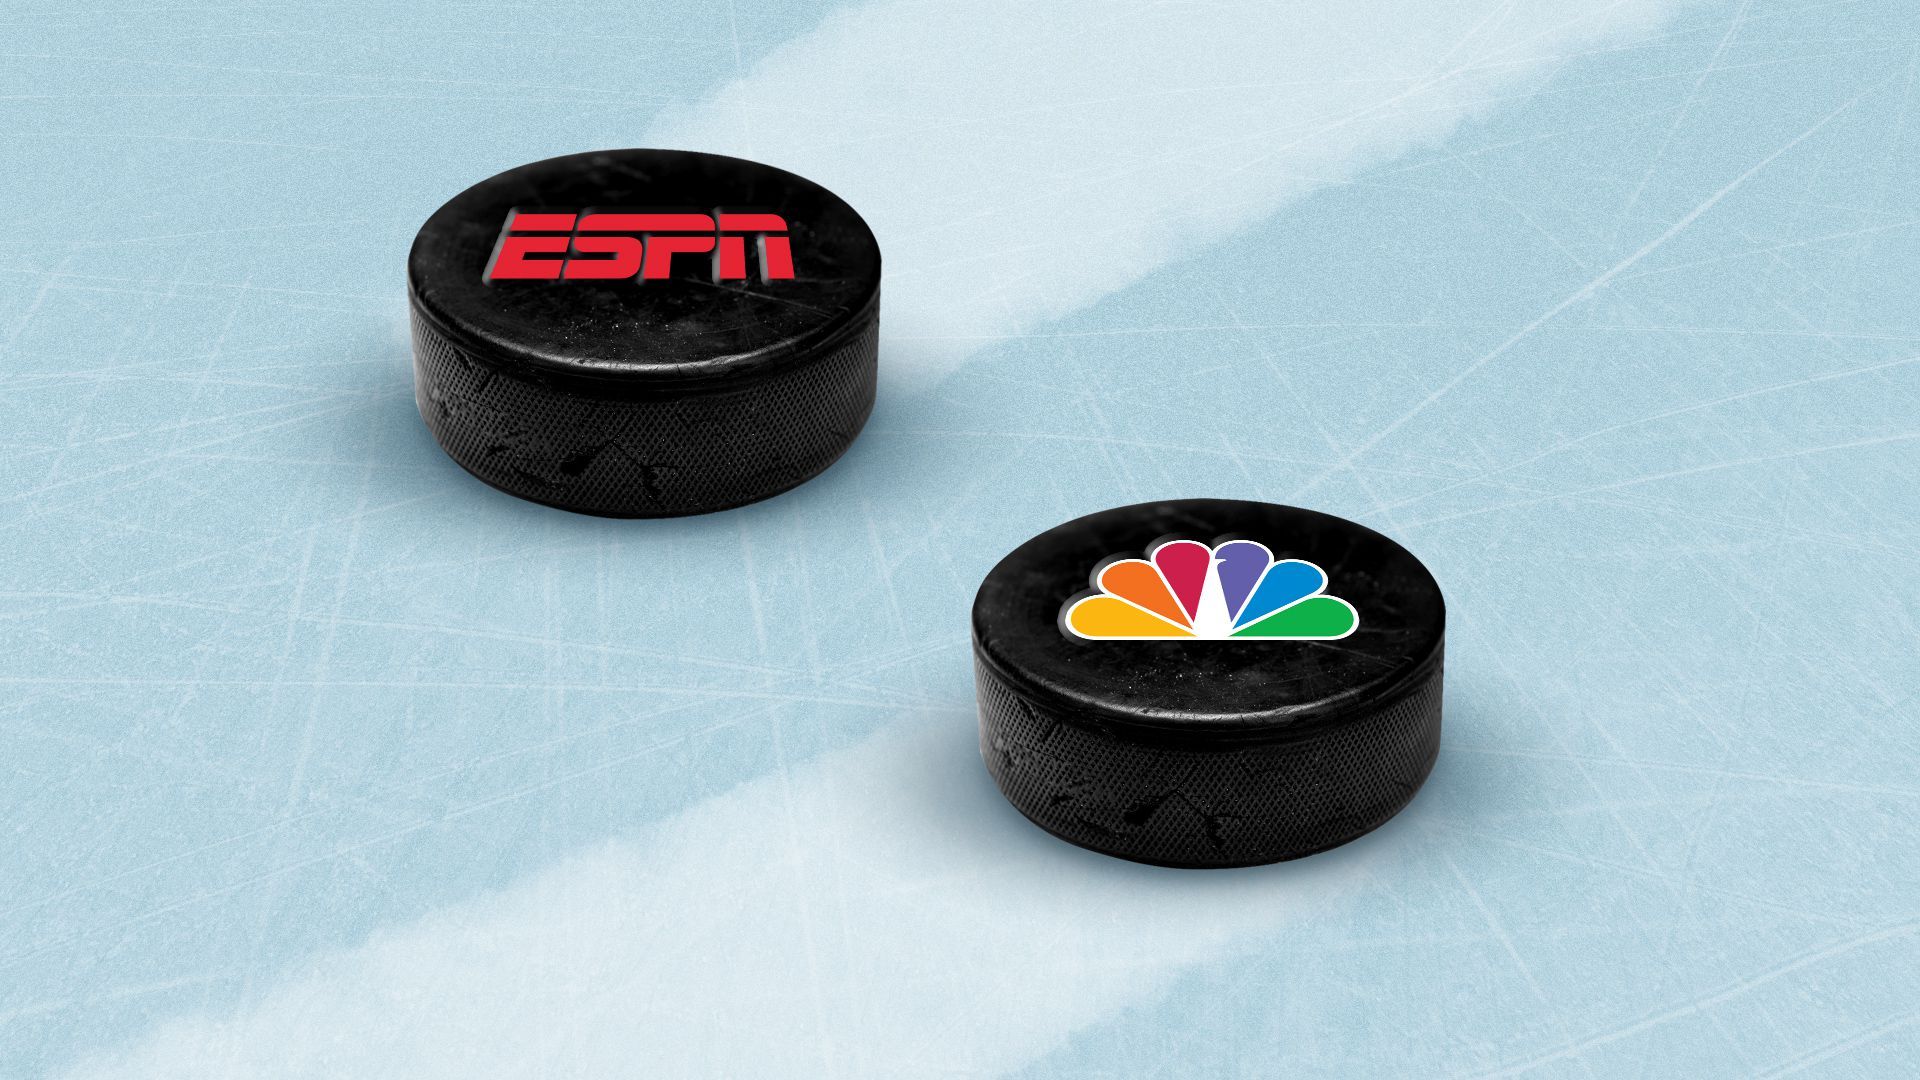 Illustration of two hockey pucks with the ESPN and NBC logos on them, sliding across the ice.